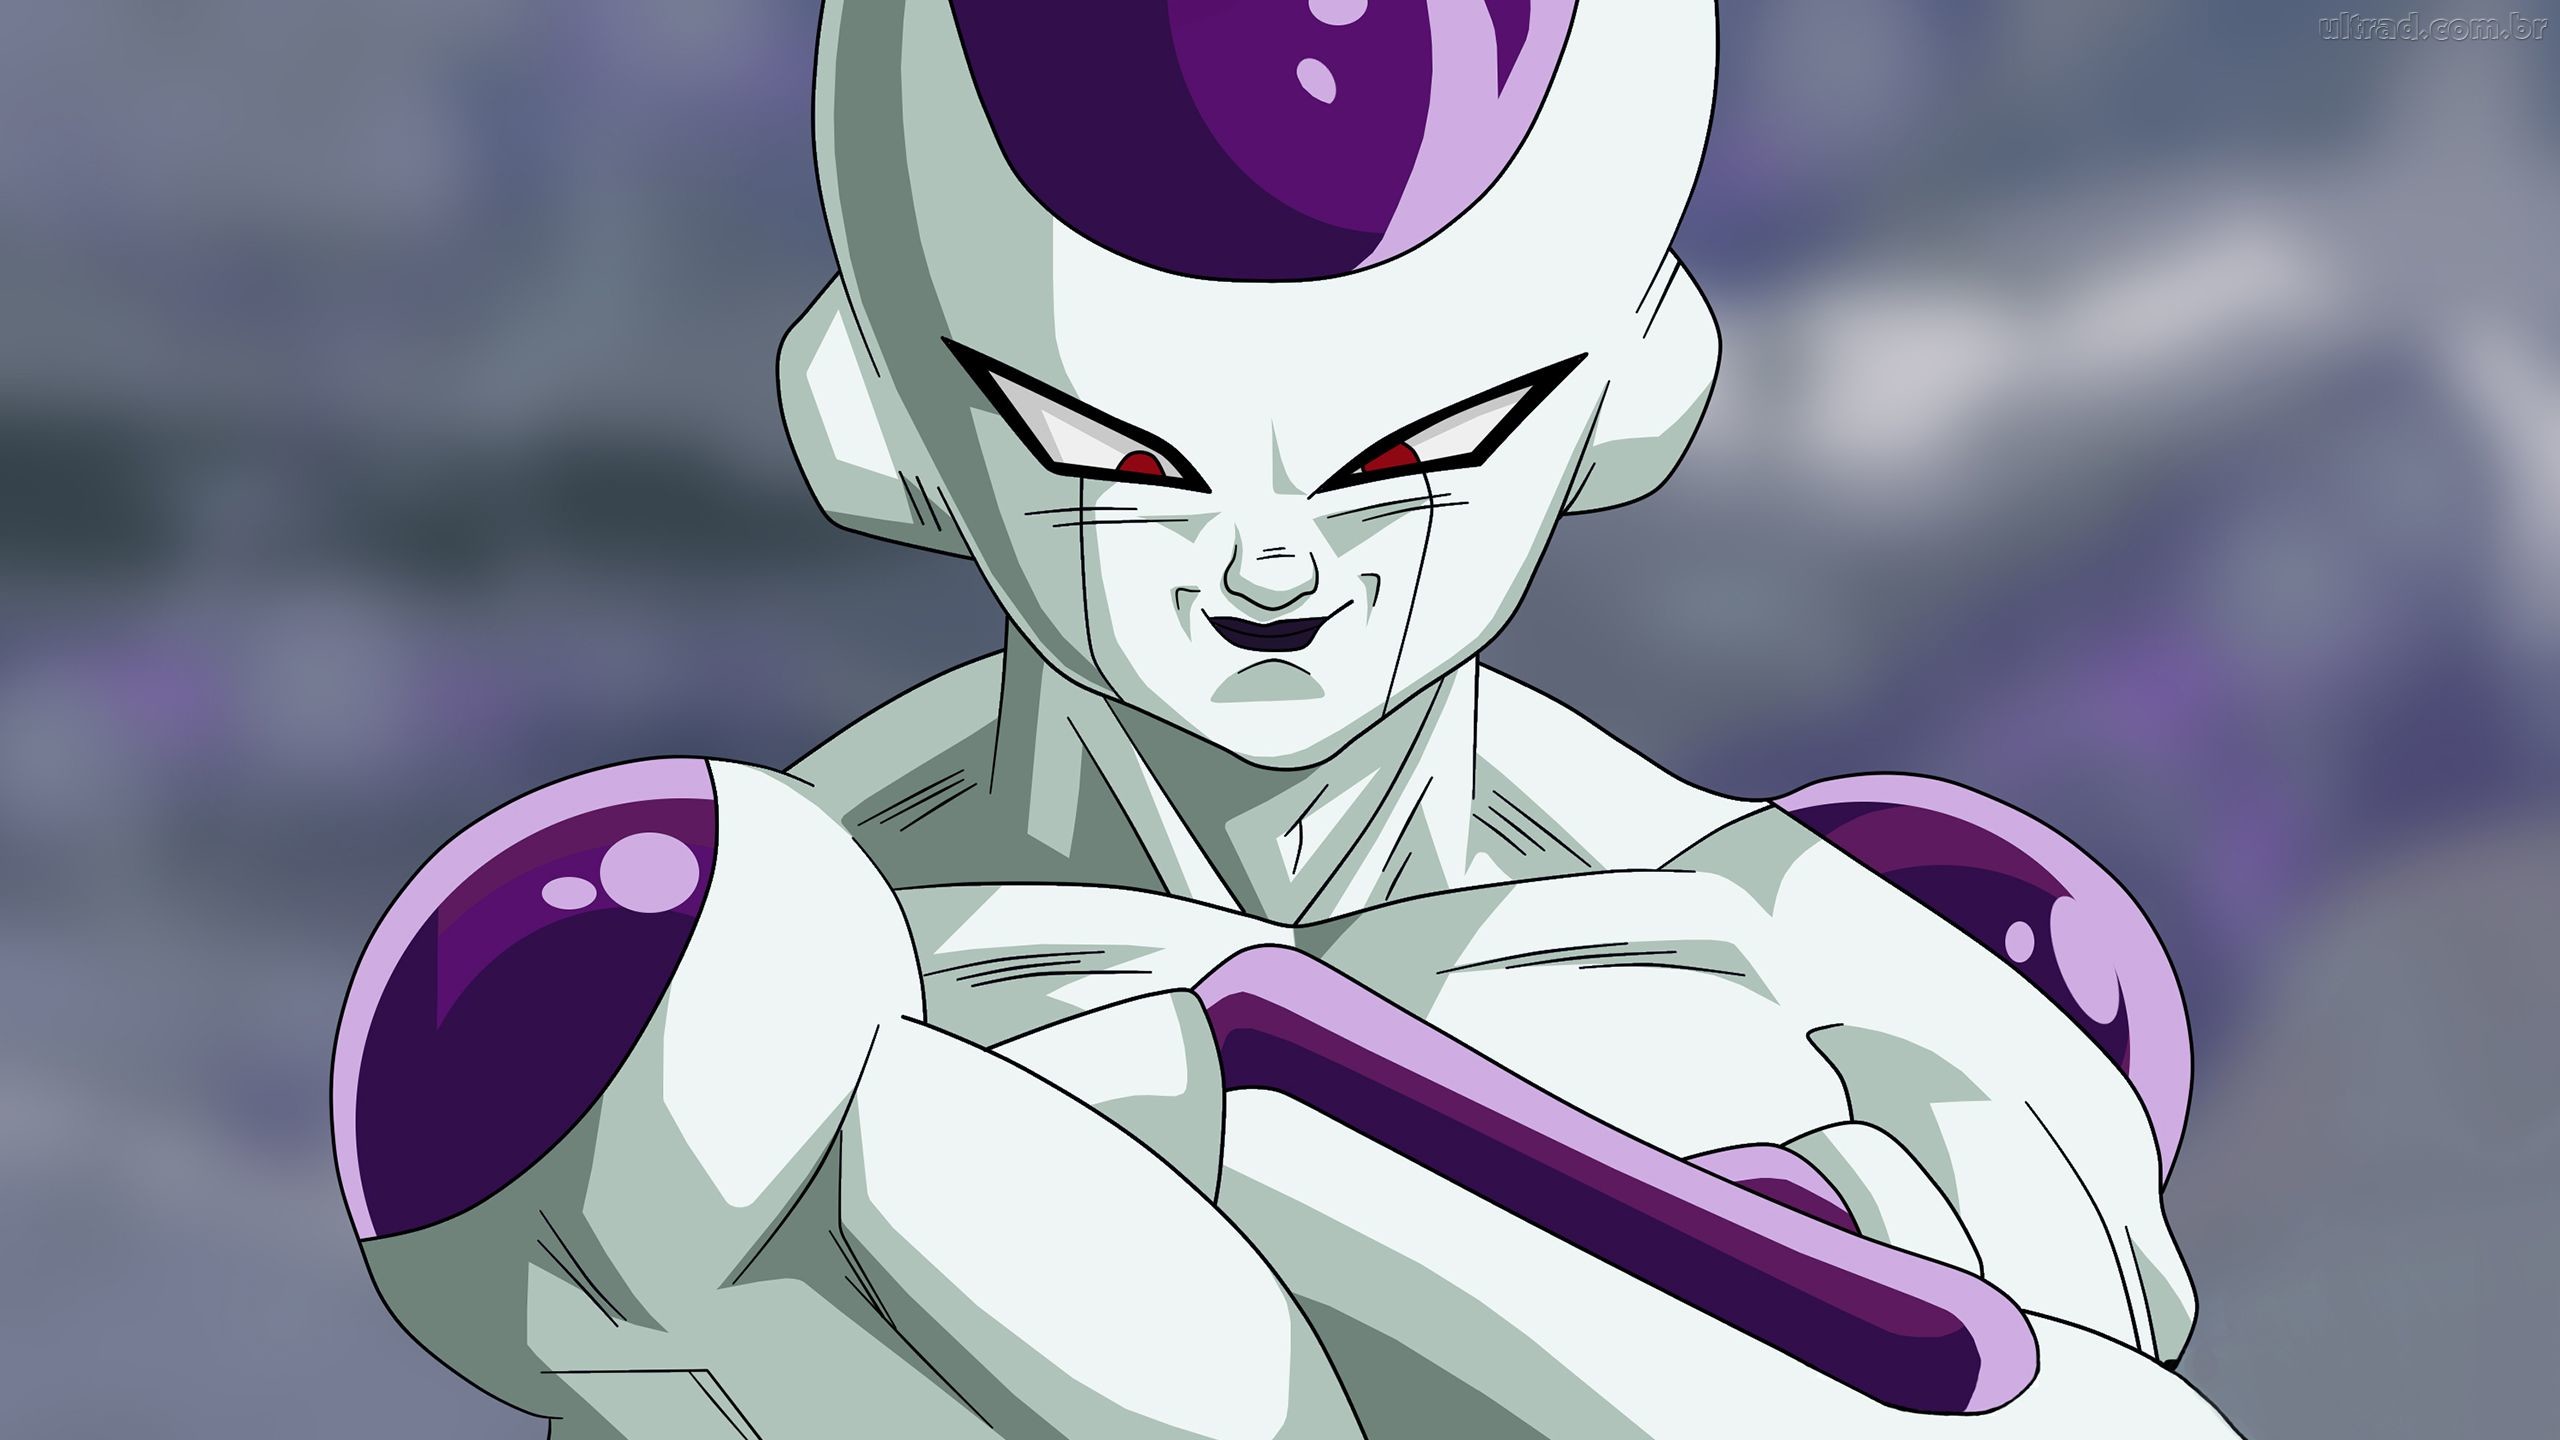 Frieza arms crossed wallpaper,